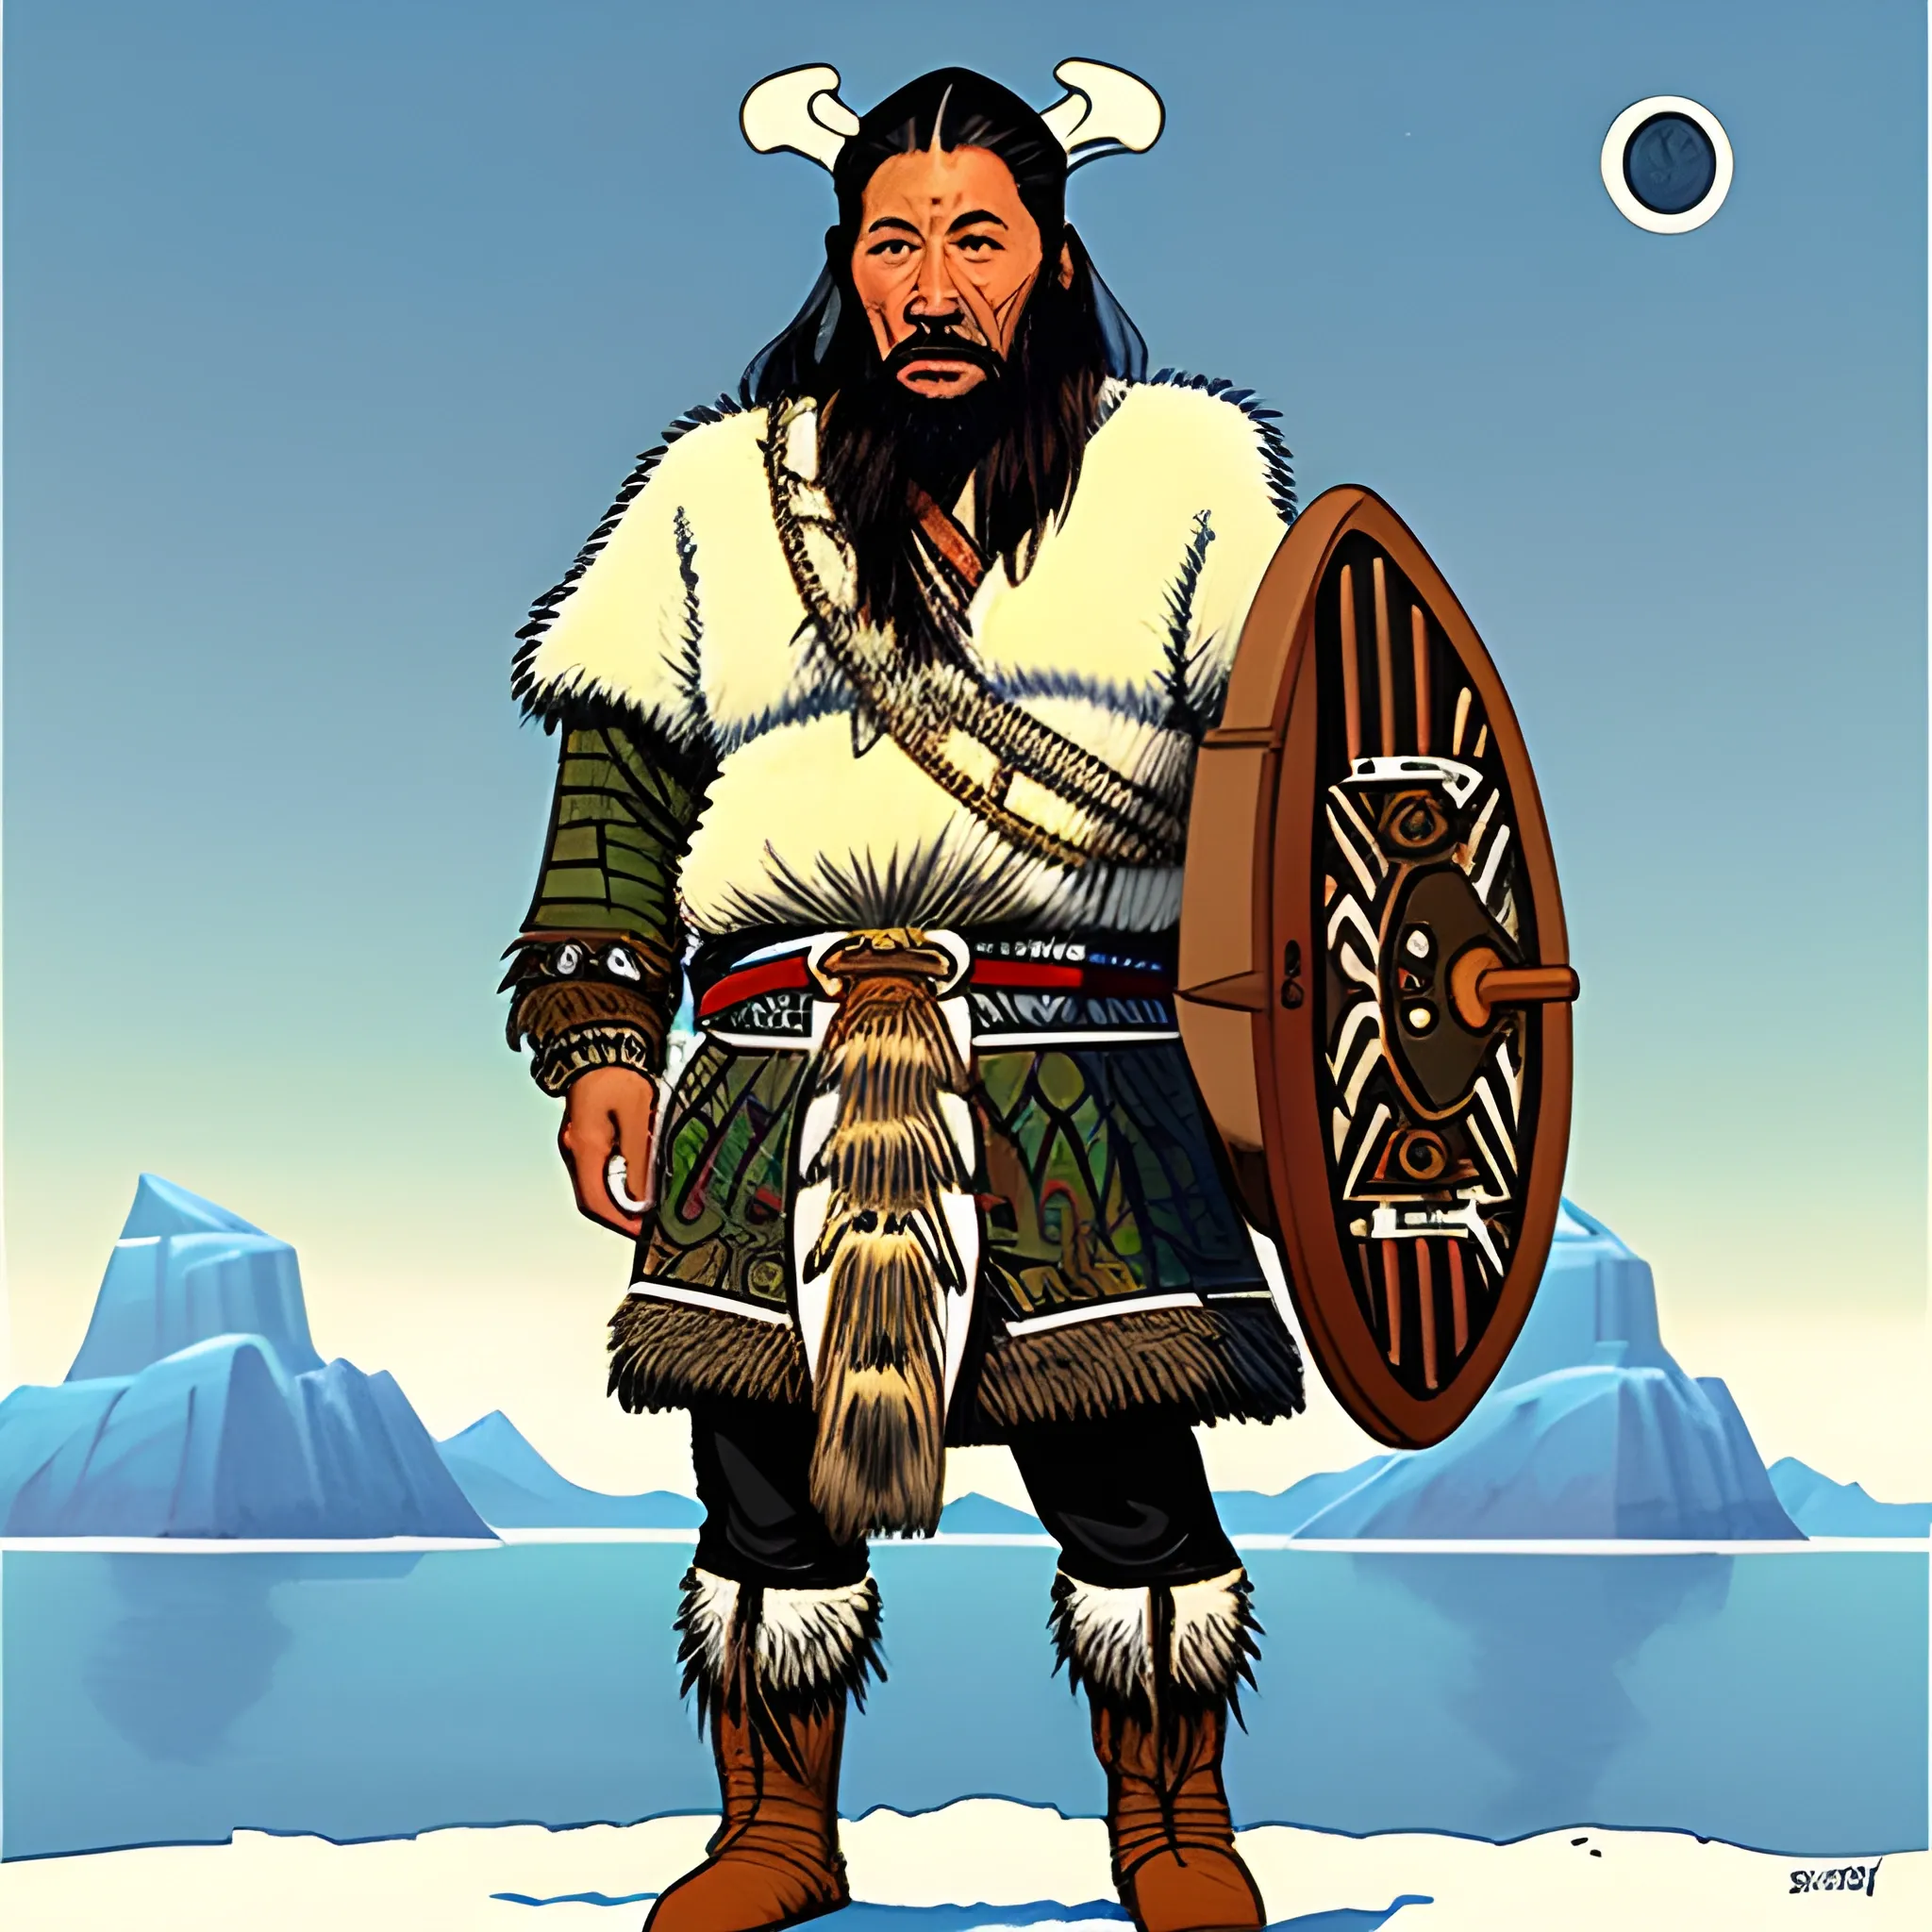 Inuit chief, full body, with viking chieftain clothes, with aspects of Inuit design, looking of into the distance, down ion Jean Giraud's art style